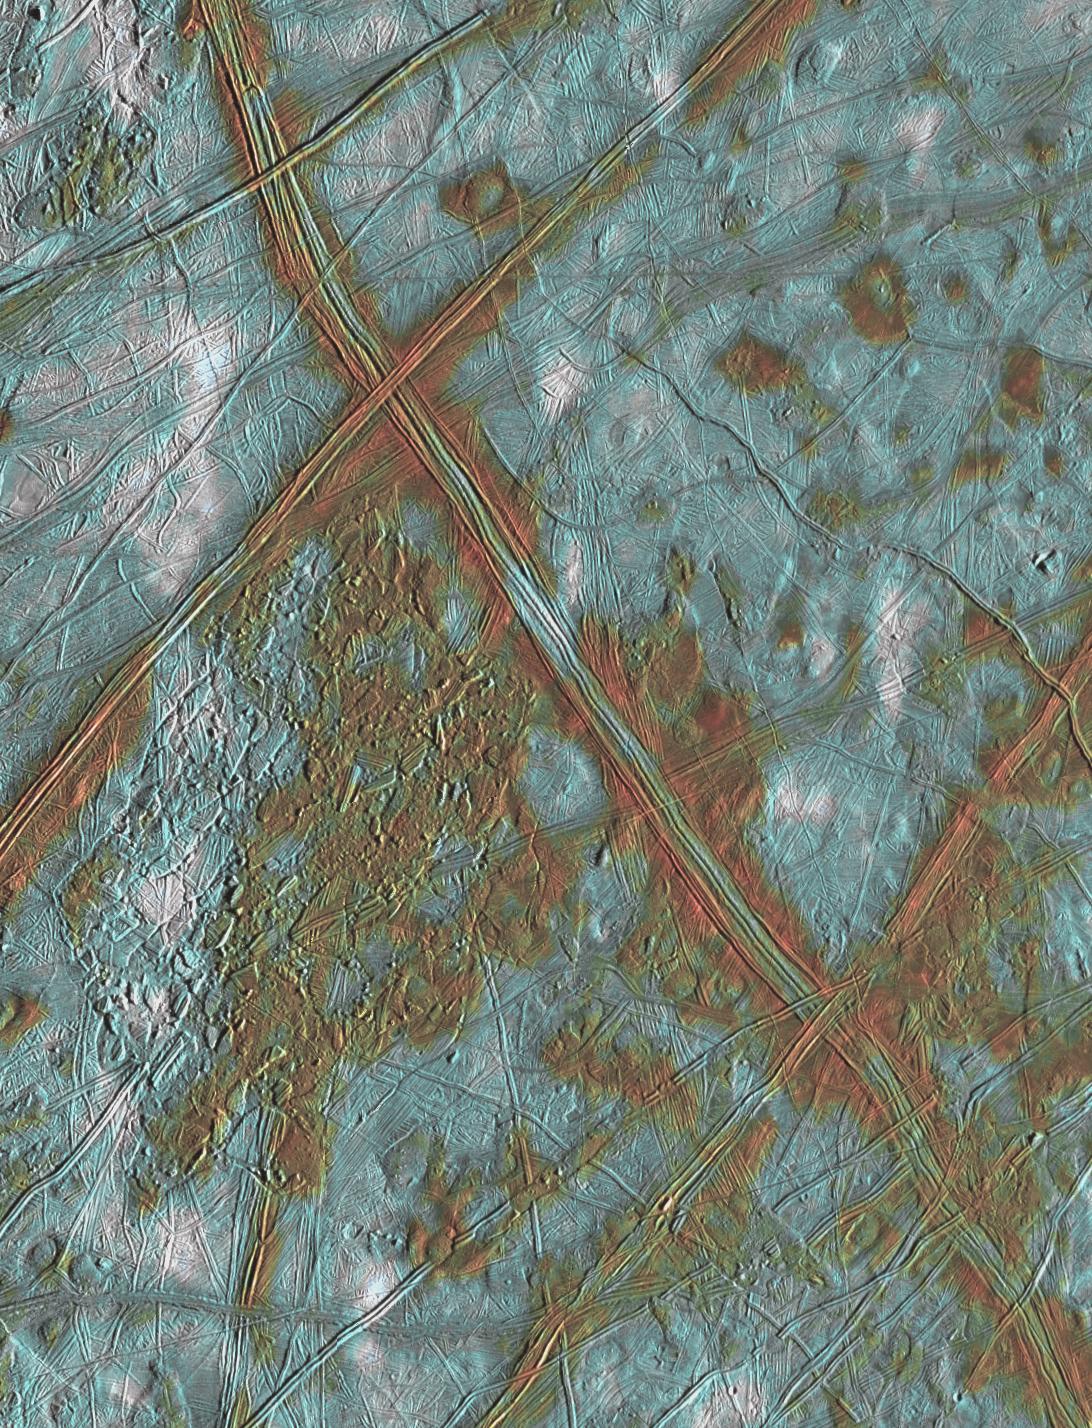 An image of the surface of Europa